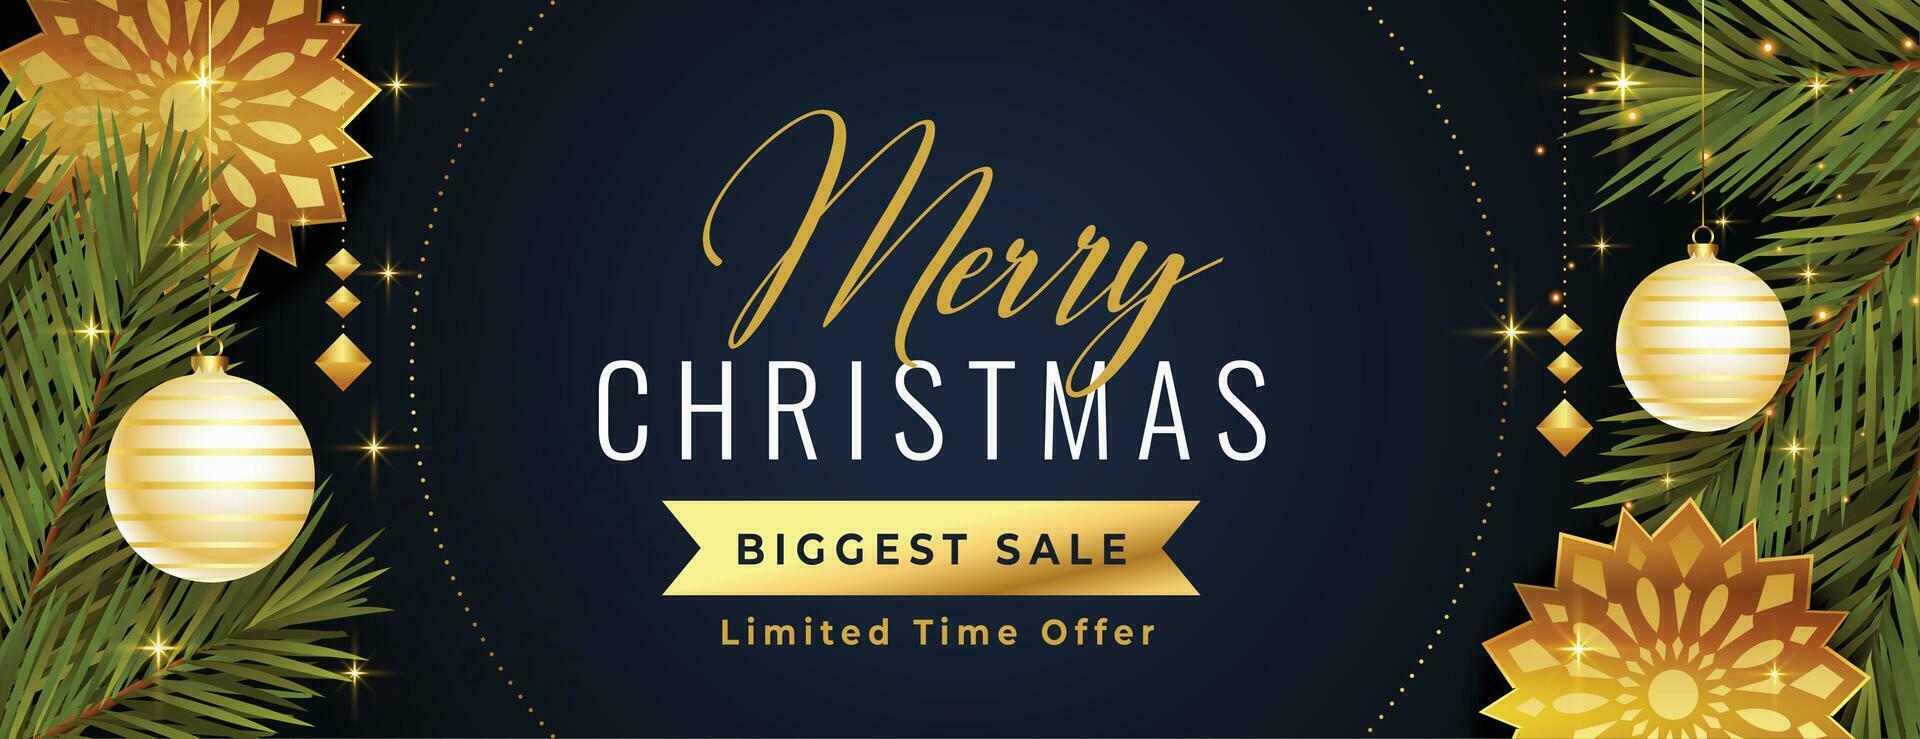 christmas holiday sale web banner in realistic elements design vector